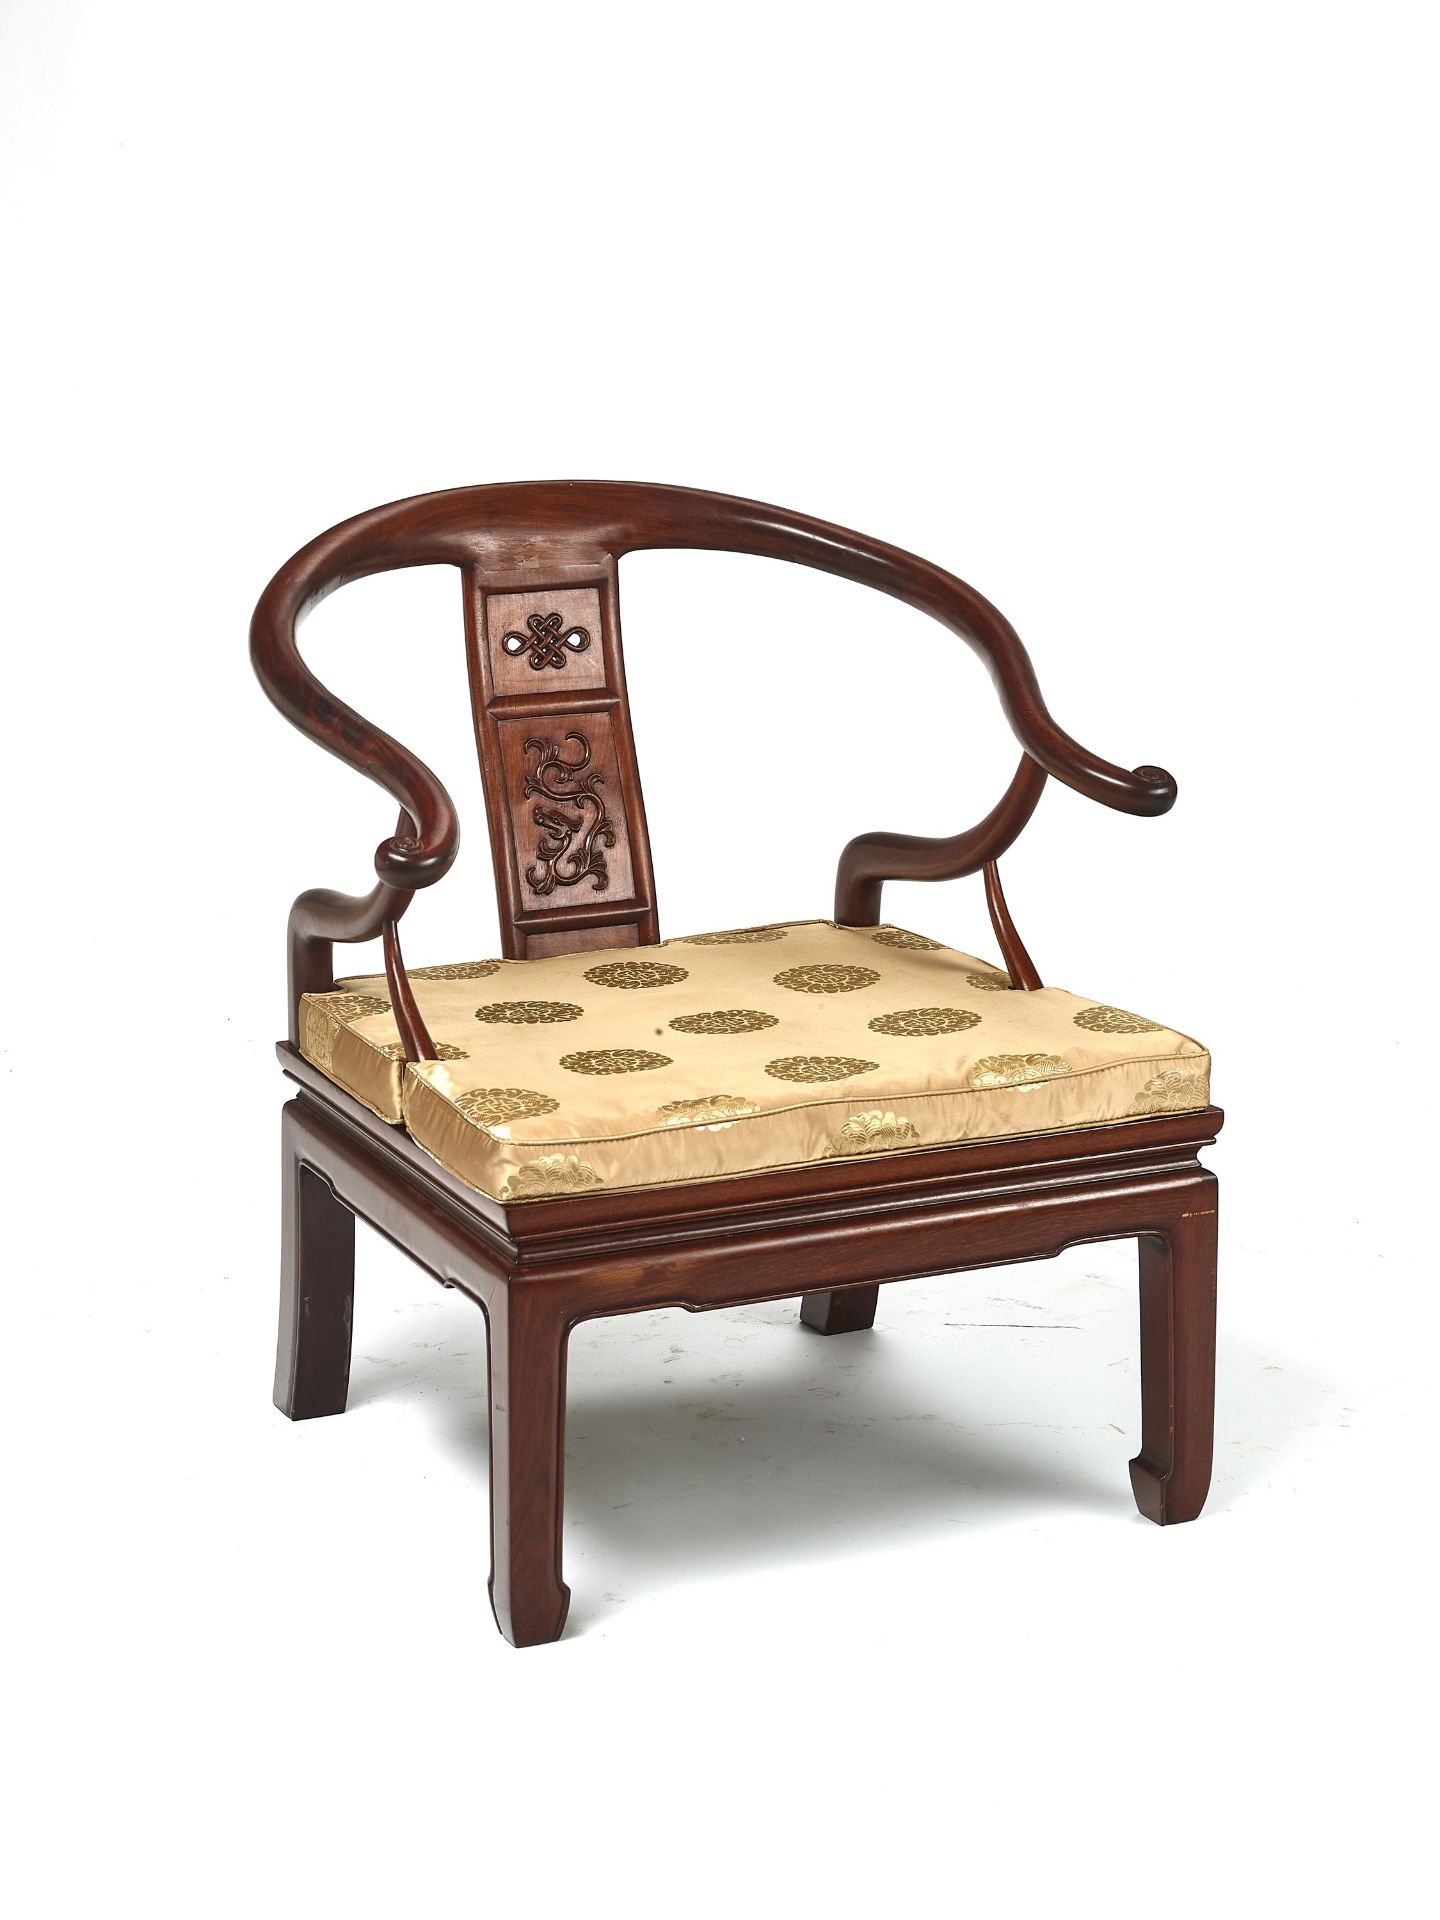 A CHINESE 'HORSESHOE' LOW CHAIR, LATE QING DYNASTY